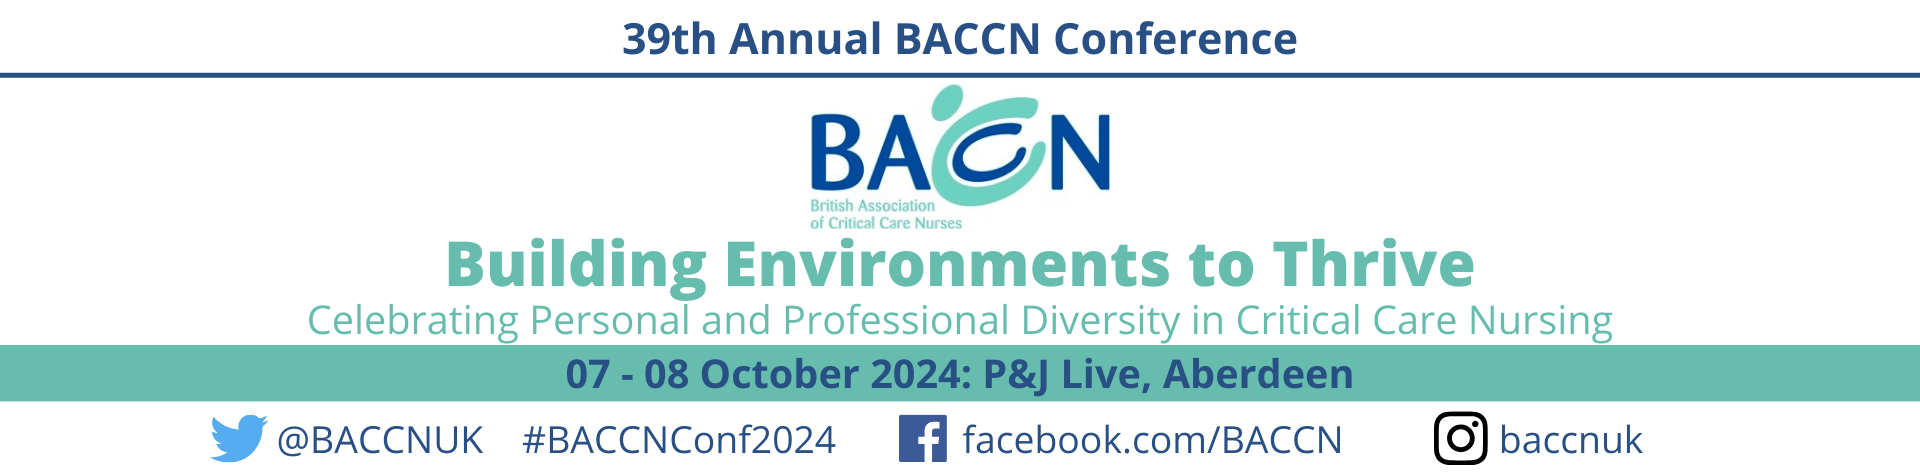 39th Annual BACCN Conference